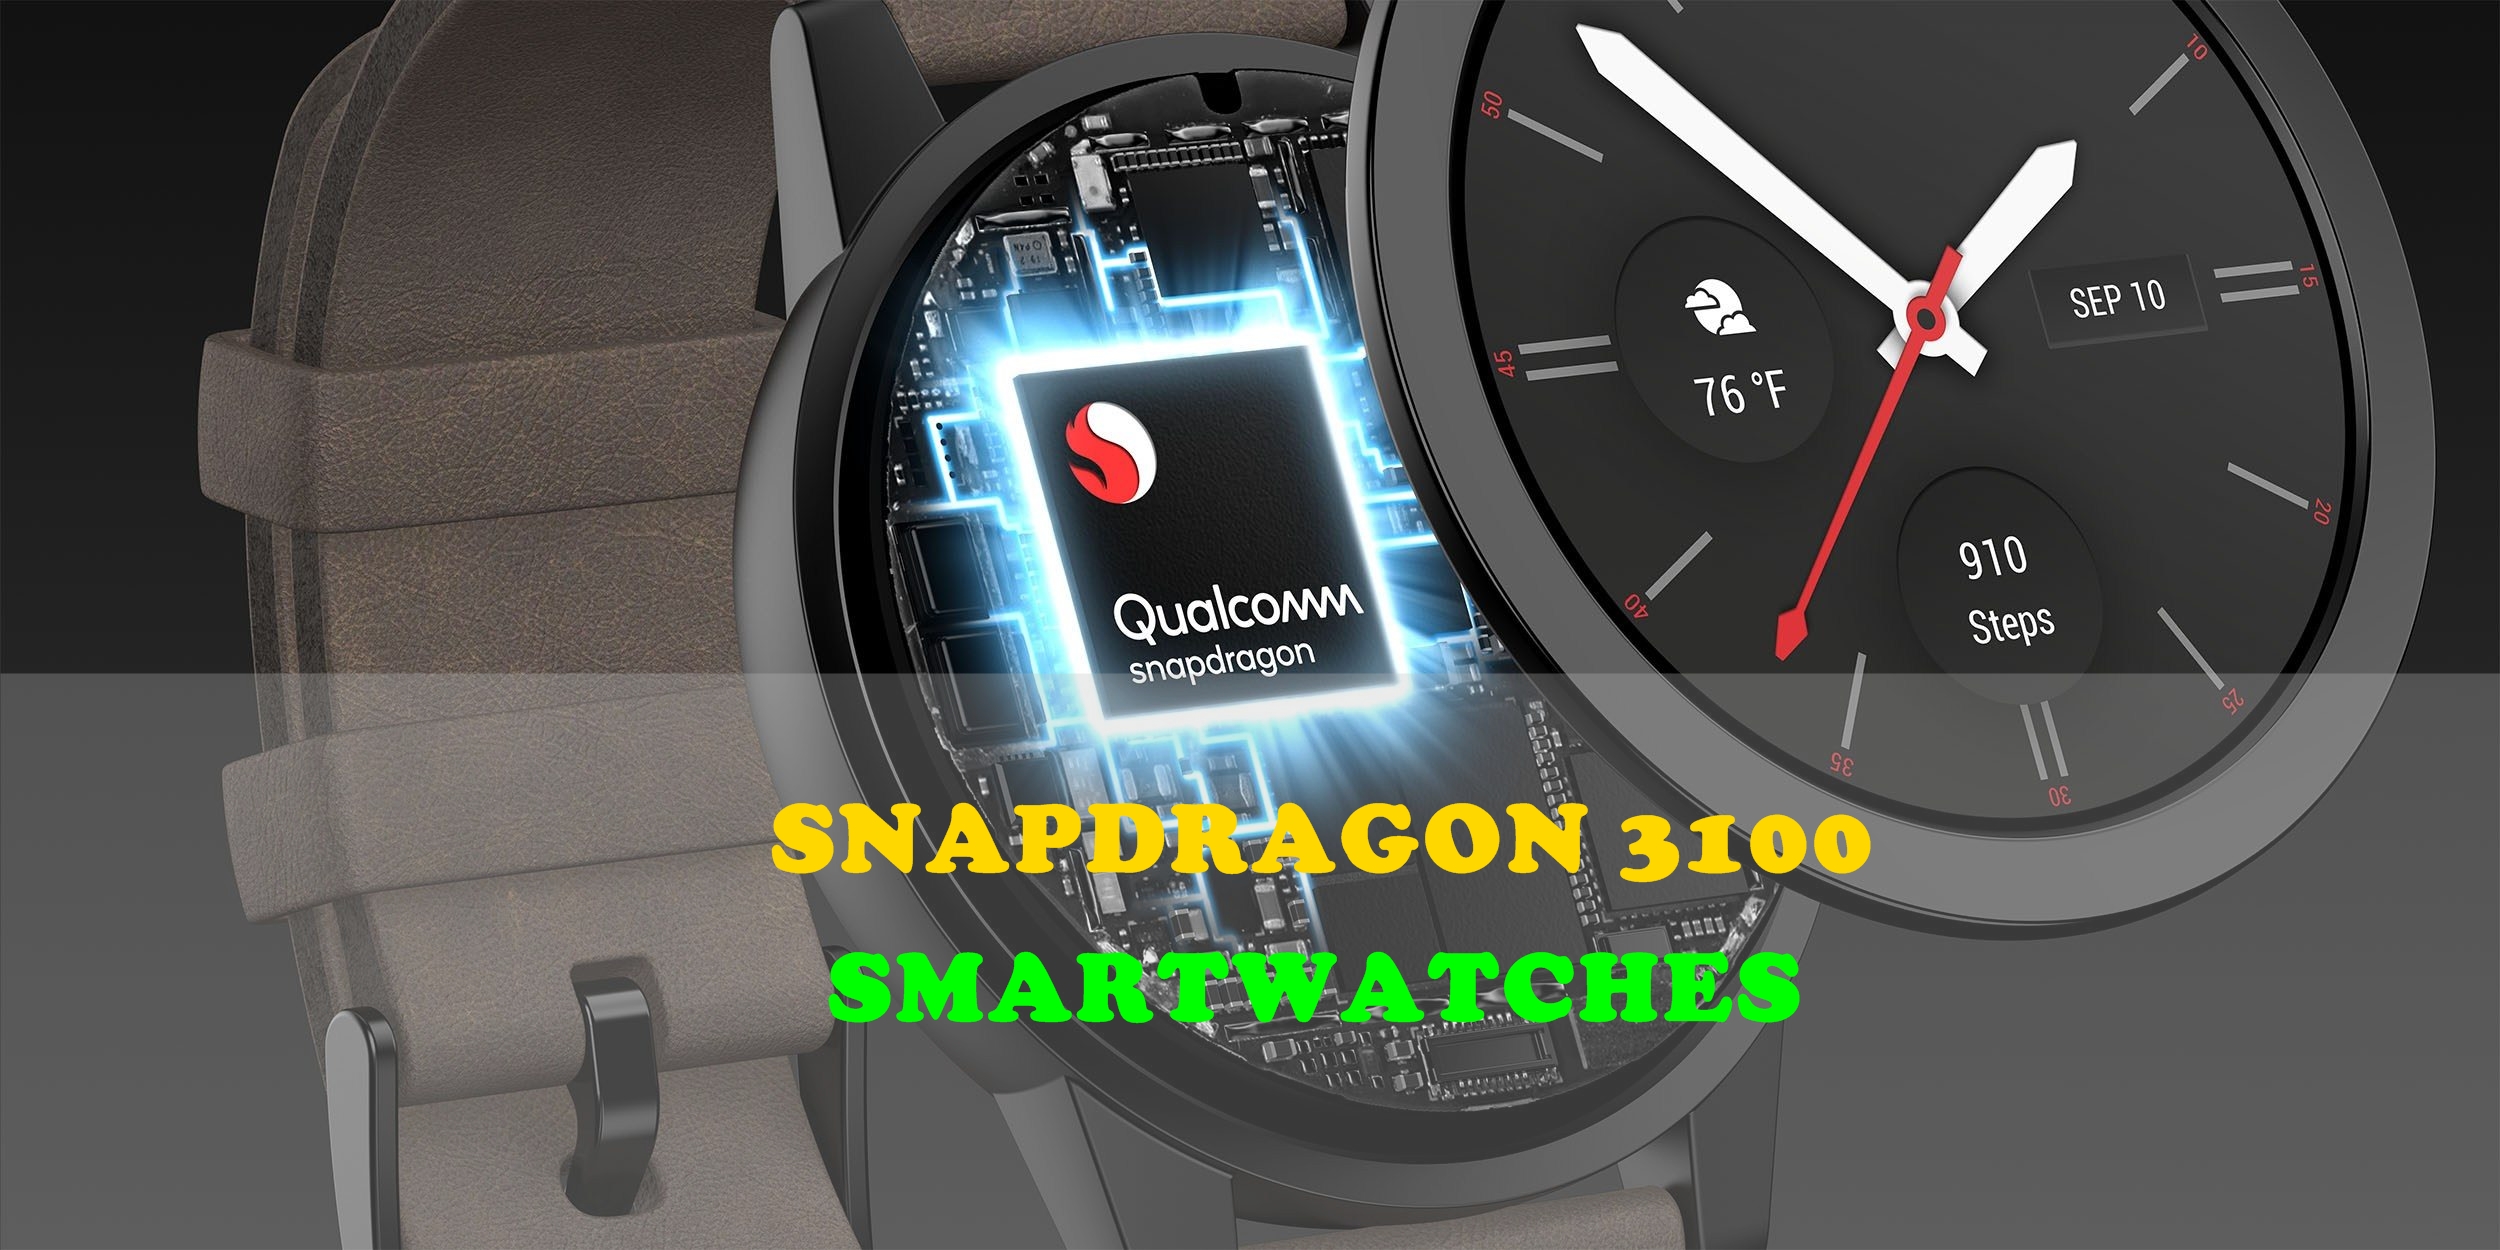 A List of All Snapdragon 3100 Smartwatches